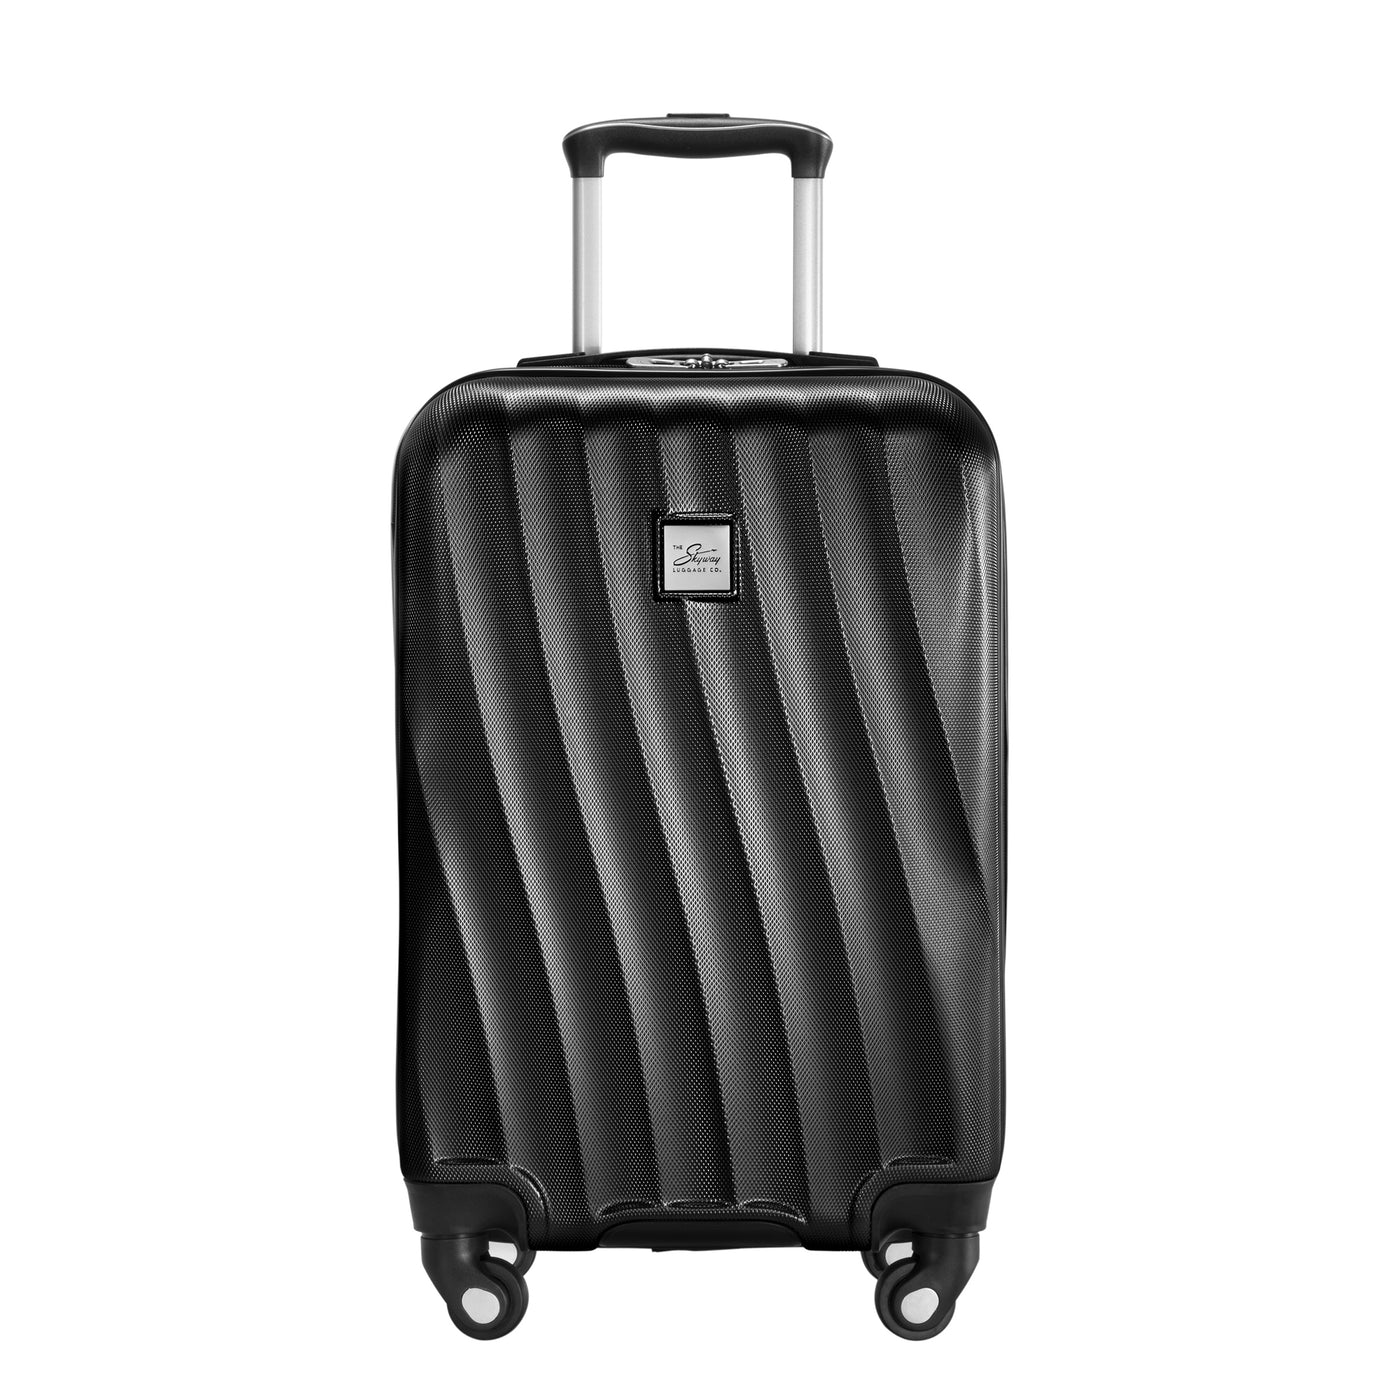 Kenai 2 Piece Set - Carry-On and Medium Check-In